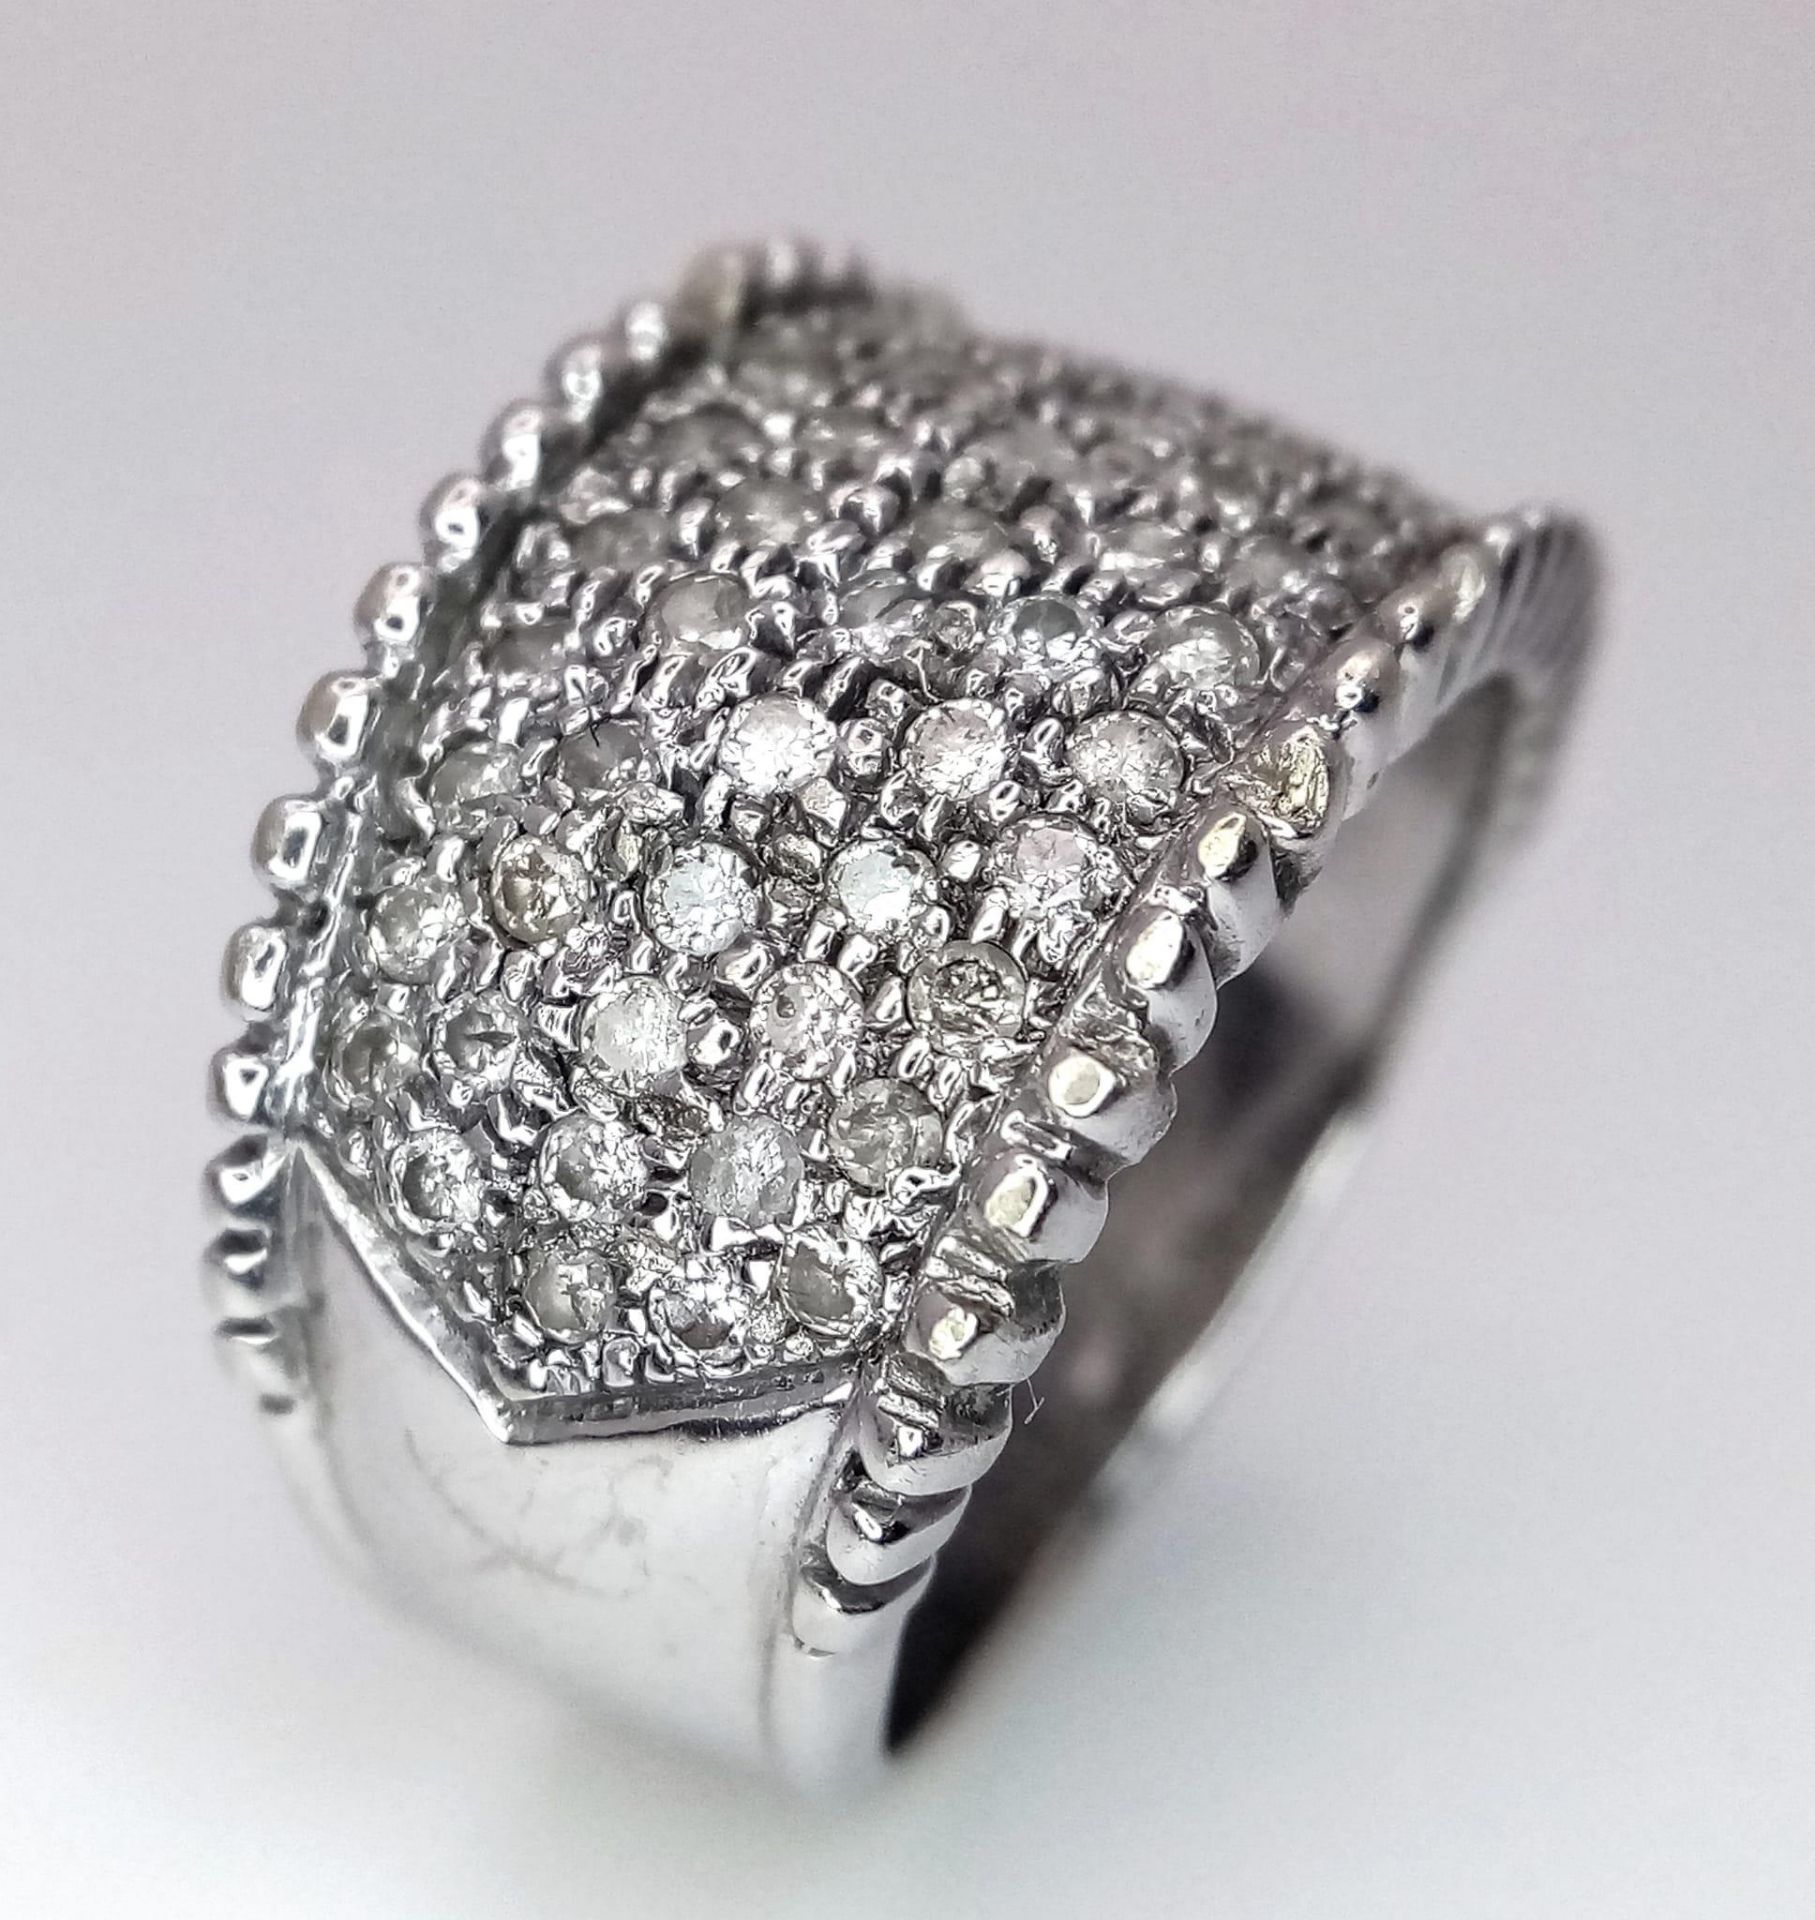 A 18K WHITE GOLD DIAMOND ENCRUSTED BAND RING 0.75CT 10.1G SIZE M 1/22 ref: 6538 - Image 3 of 8